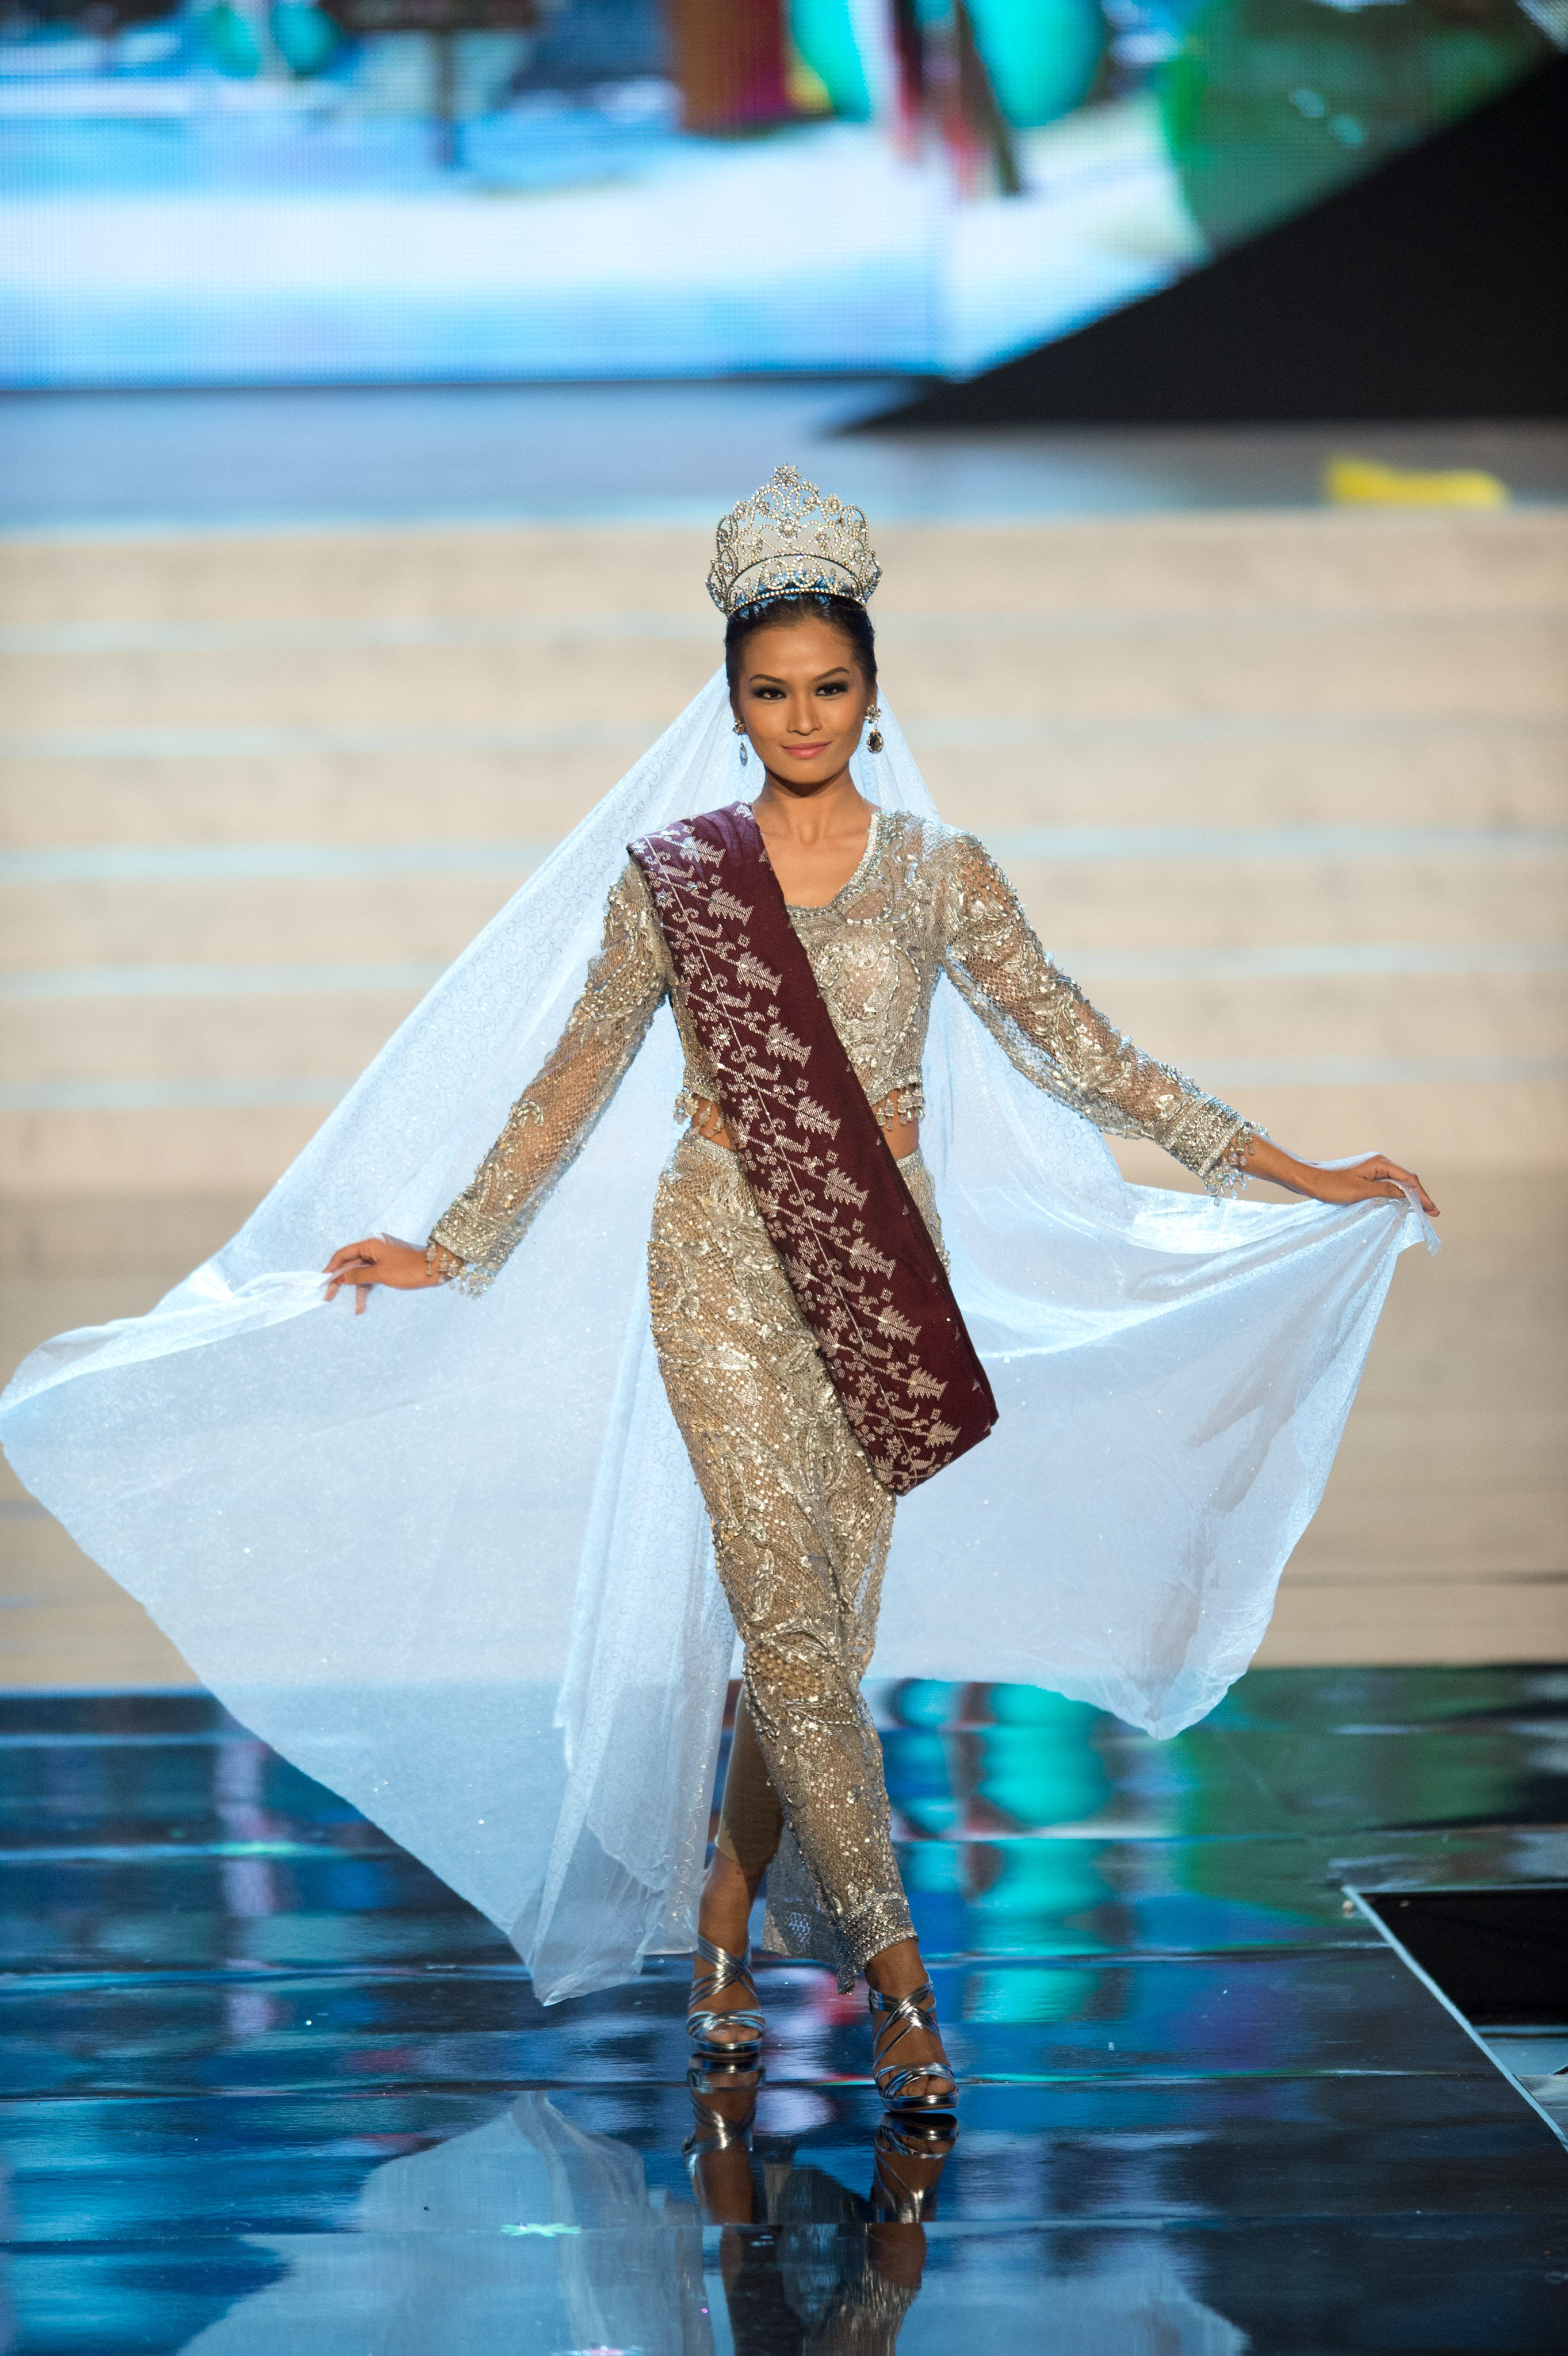 TRIBAL PRINCESS. Miss Philippines 2012 Janine Tugonon in her national costume at  the Miss Universe 2012 National Costume Show in Las Vegas, Nevada. Photo by the Miss Universe Organization      